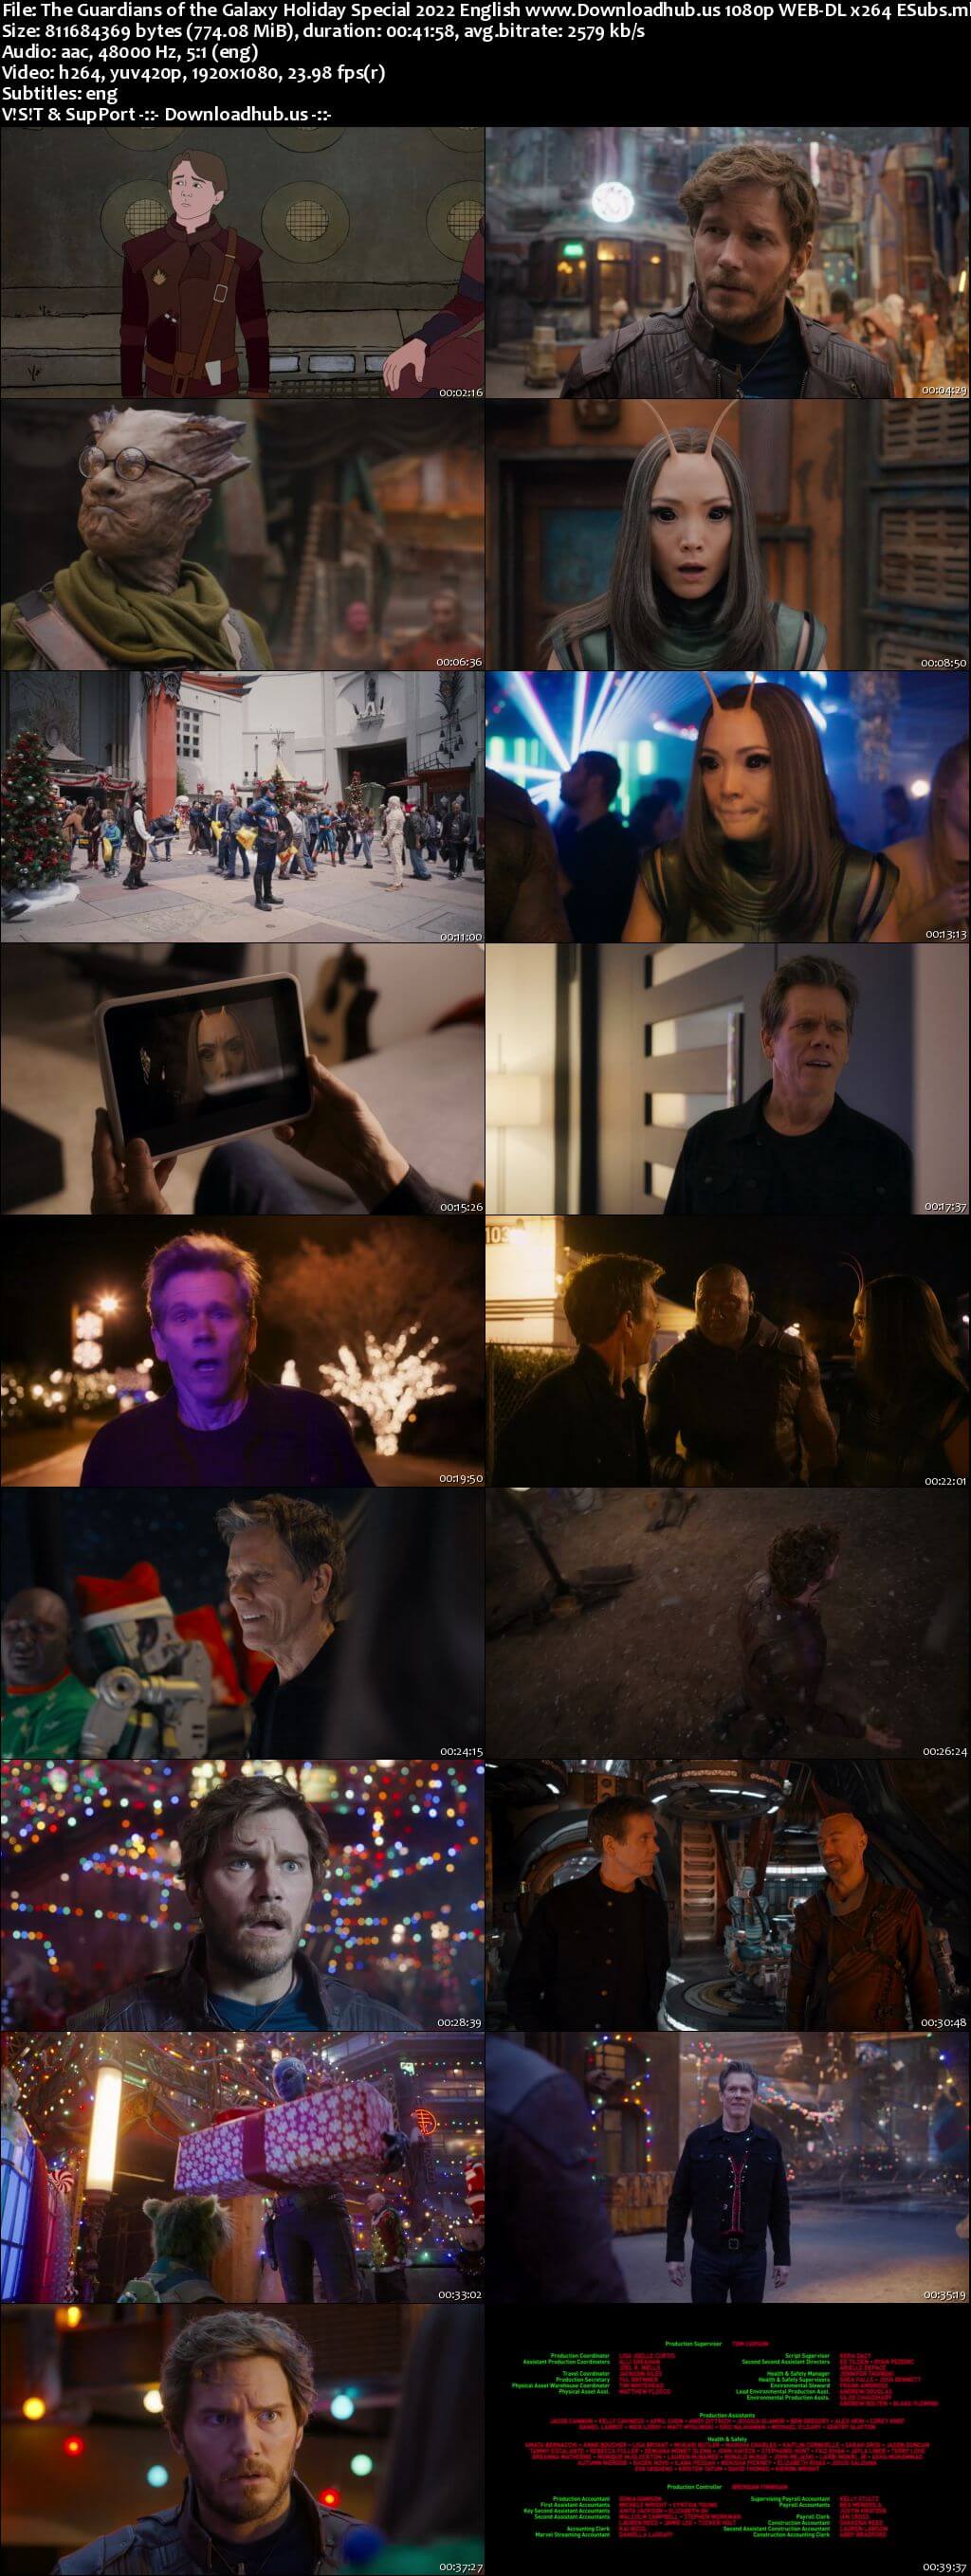 The Guardians of the Galaxy Holiday Special 2022 English 1080p 720p 480p Web-DL MSubs